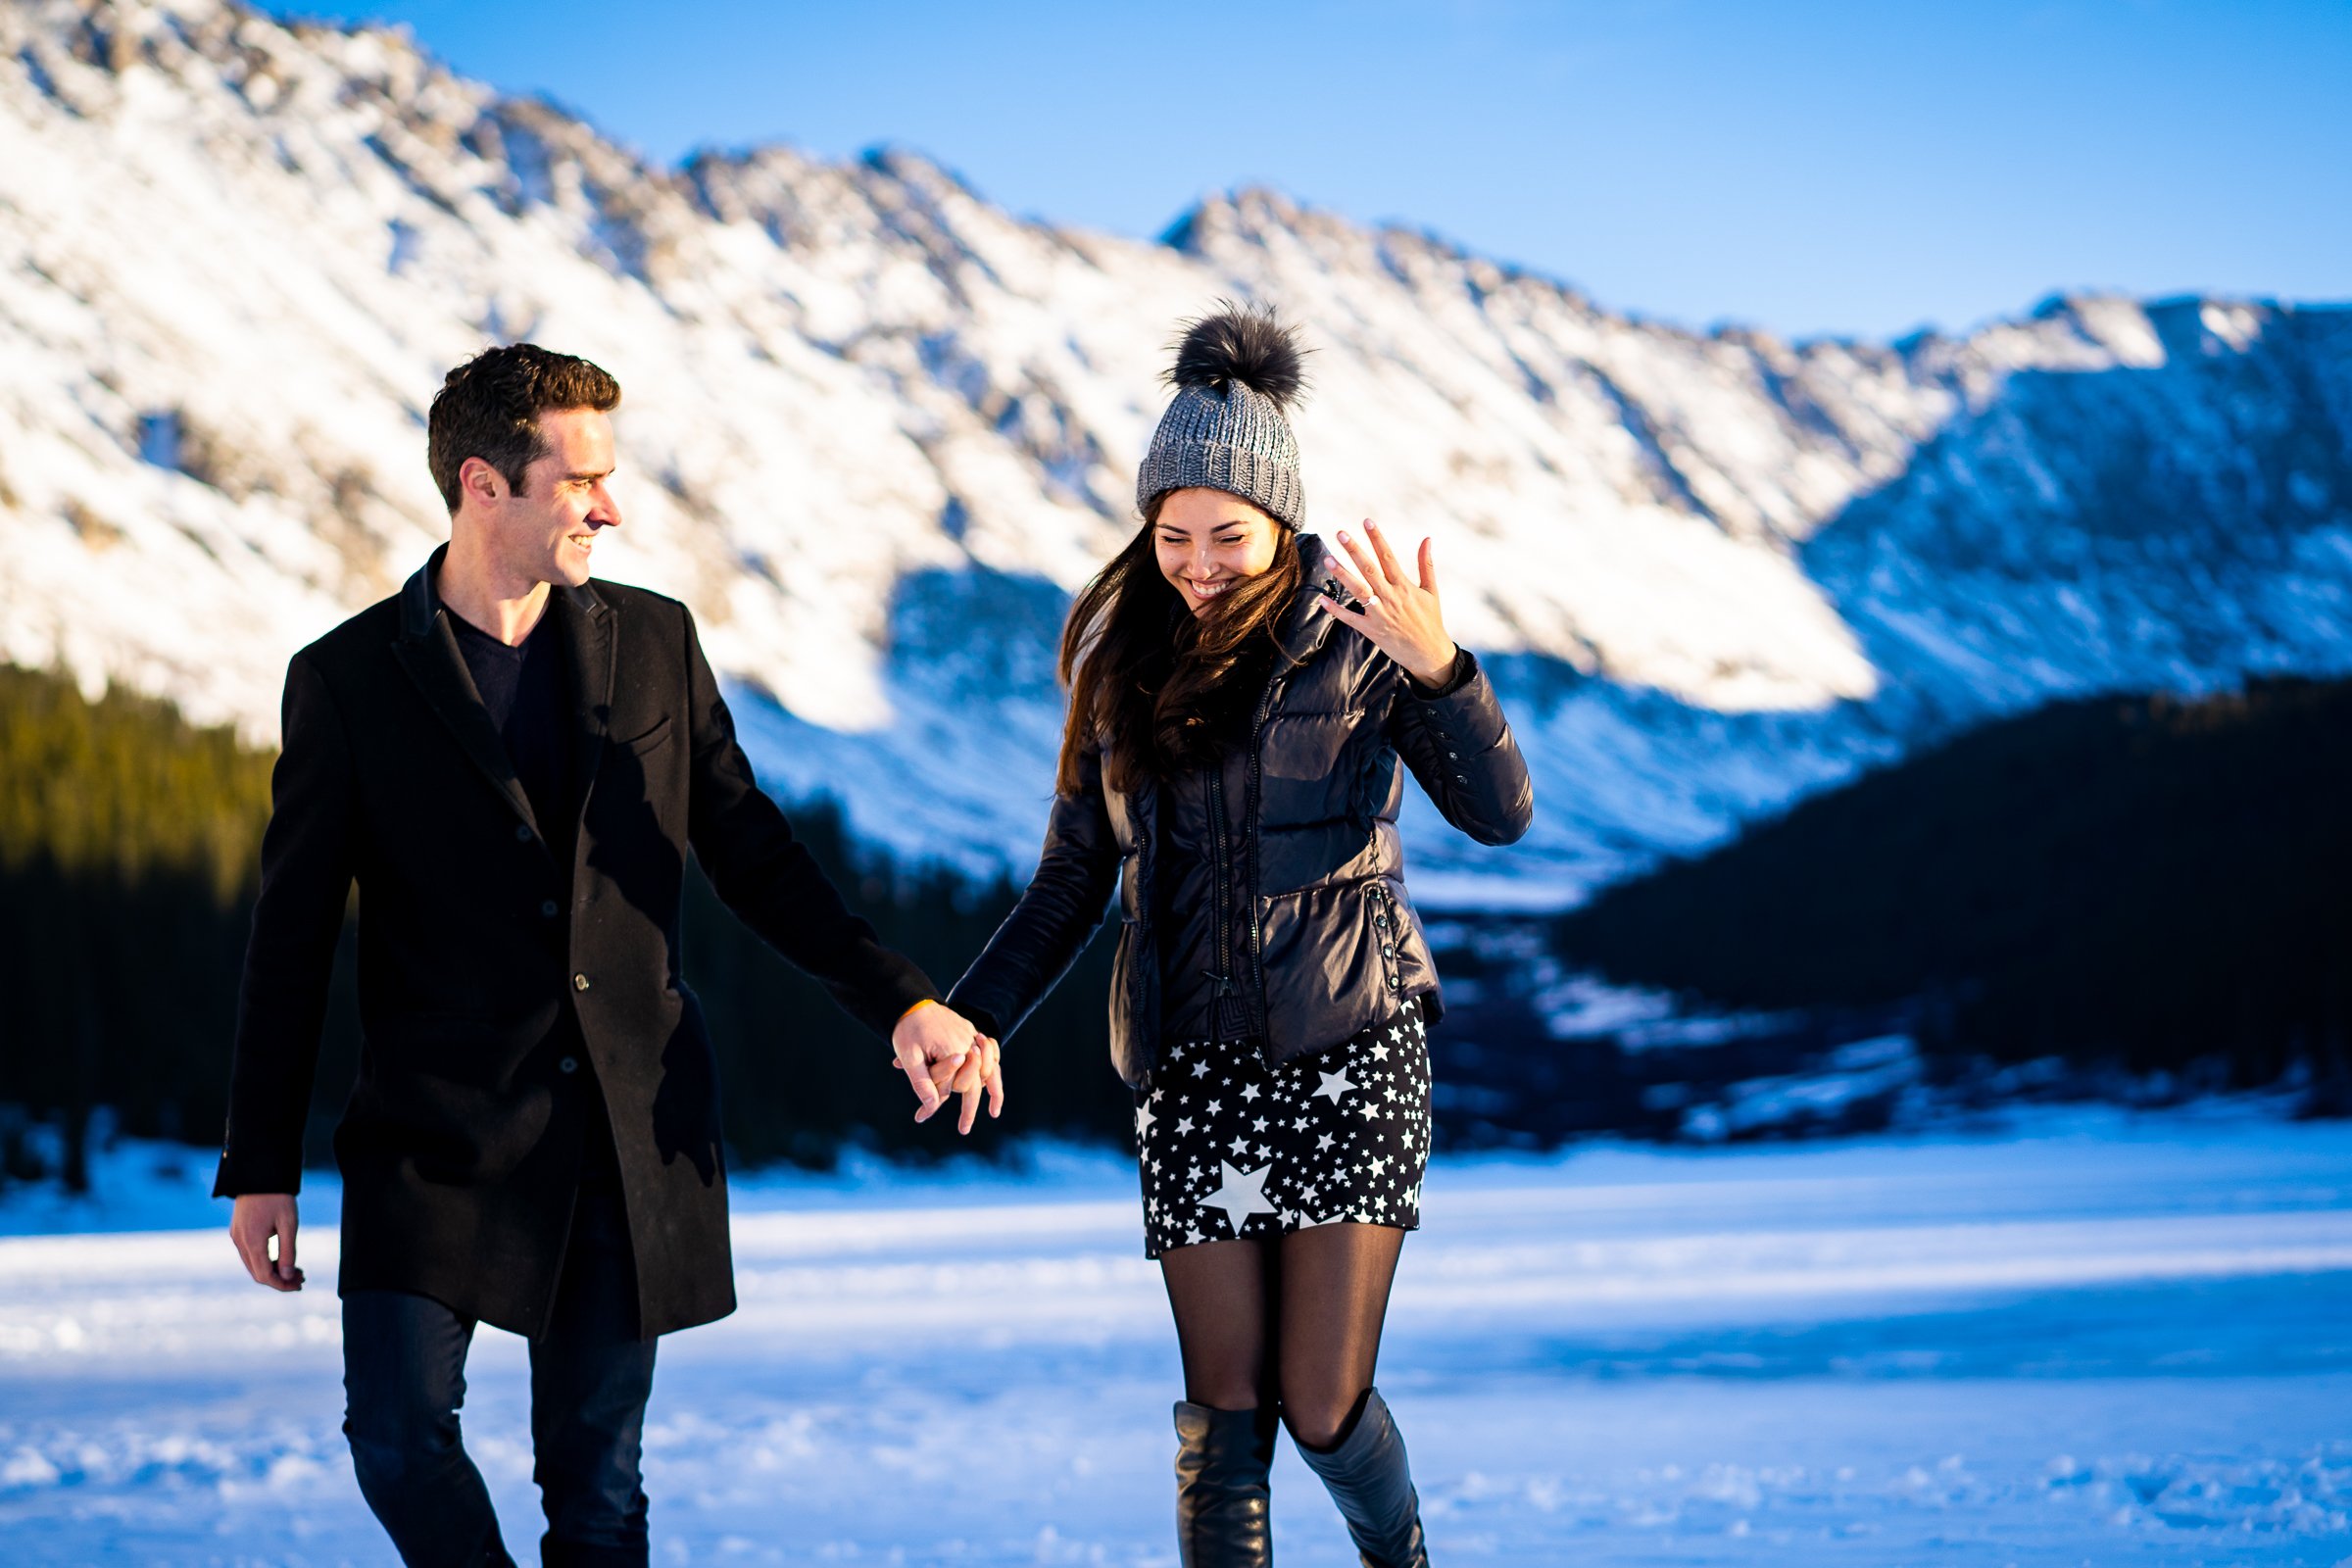 Newly engaged couple celebrate their proposal on a frozen lake with snowcapped mountains in the background, Winter Engagement Session, Winter Engagement Photos, Engagement Photos Inspiration, Engagement Photography, Engagement Photographer, Winter Engagement Photos, Proposal Photos, Proposal Photographer, Proposal Photography, Winter Proposal, Mountain Proposal, Proposal Inspiration, Summit County engagement session, Summit County engagement photos, Summit County engagement photography, Summit County engagement photographer, Summit County engagement inspiration, Colorado engagement session, Colorado engagement photos, Colorado engagement photography, Colorado engagement photographer, Colorado engagement inspiration, Clinton Gulch Engagement